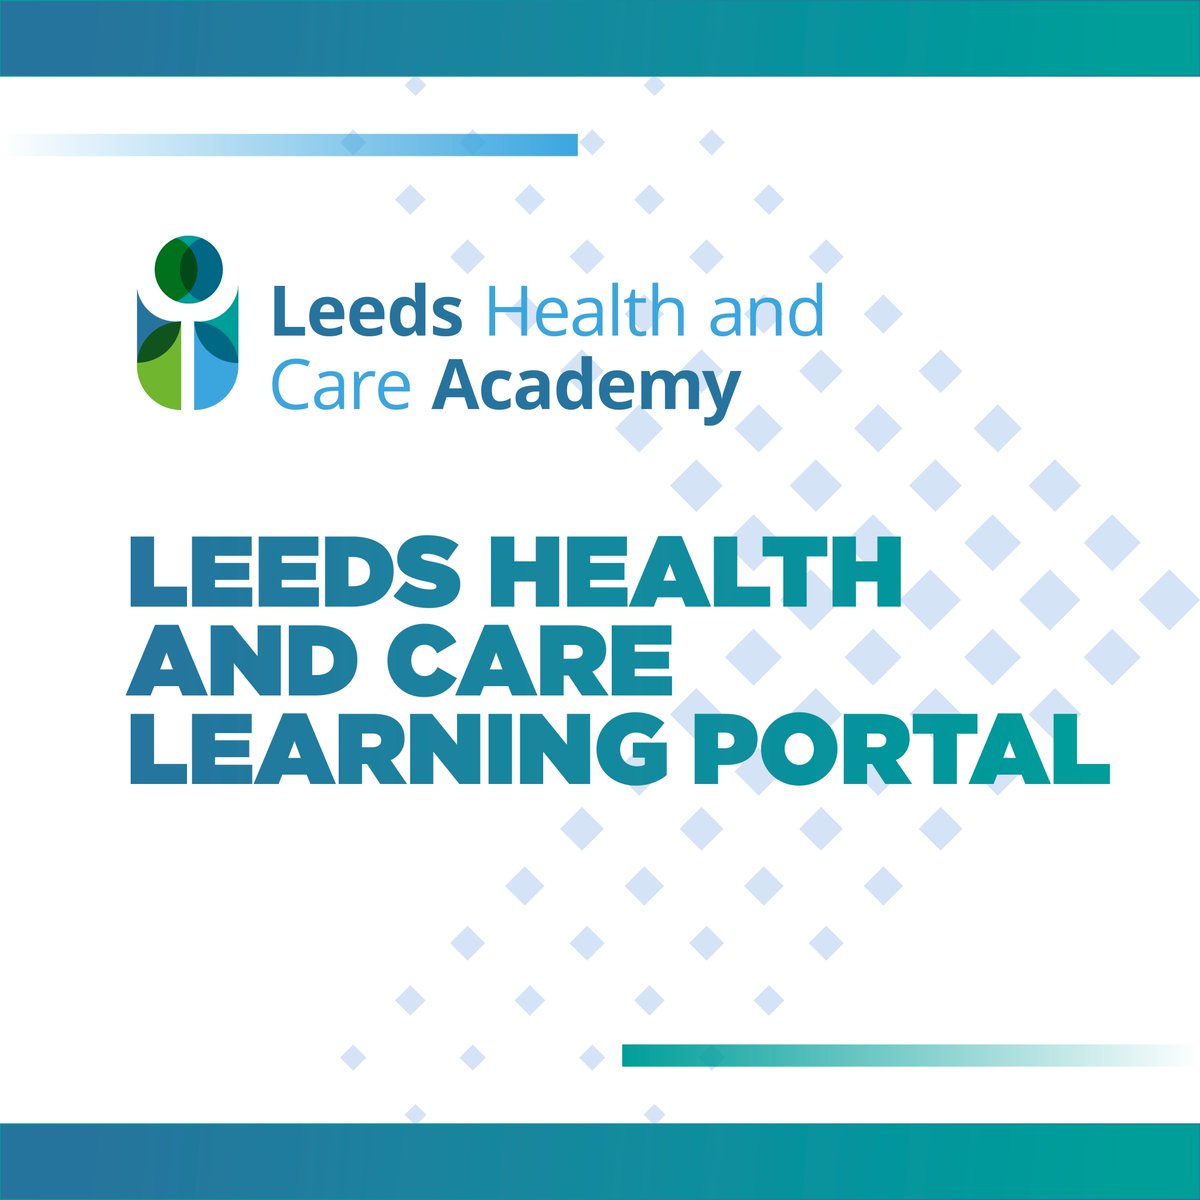 Did you know that if you work or volunteer in health and care in Leeds you can access free learning, training and development opportunities on the Leeds Health and Care Learning Portal? Create your free account & explore the available opportunities here: leedshealthandcarelearningportal.org/totara/dashboa…